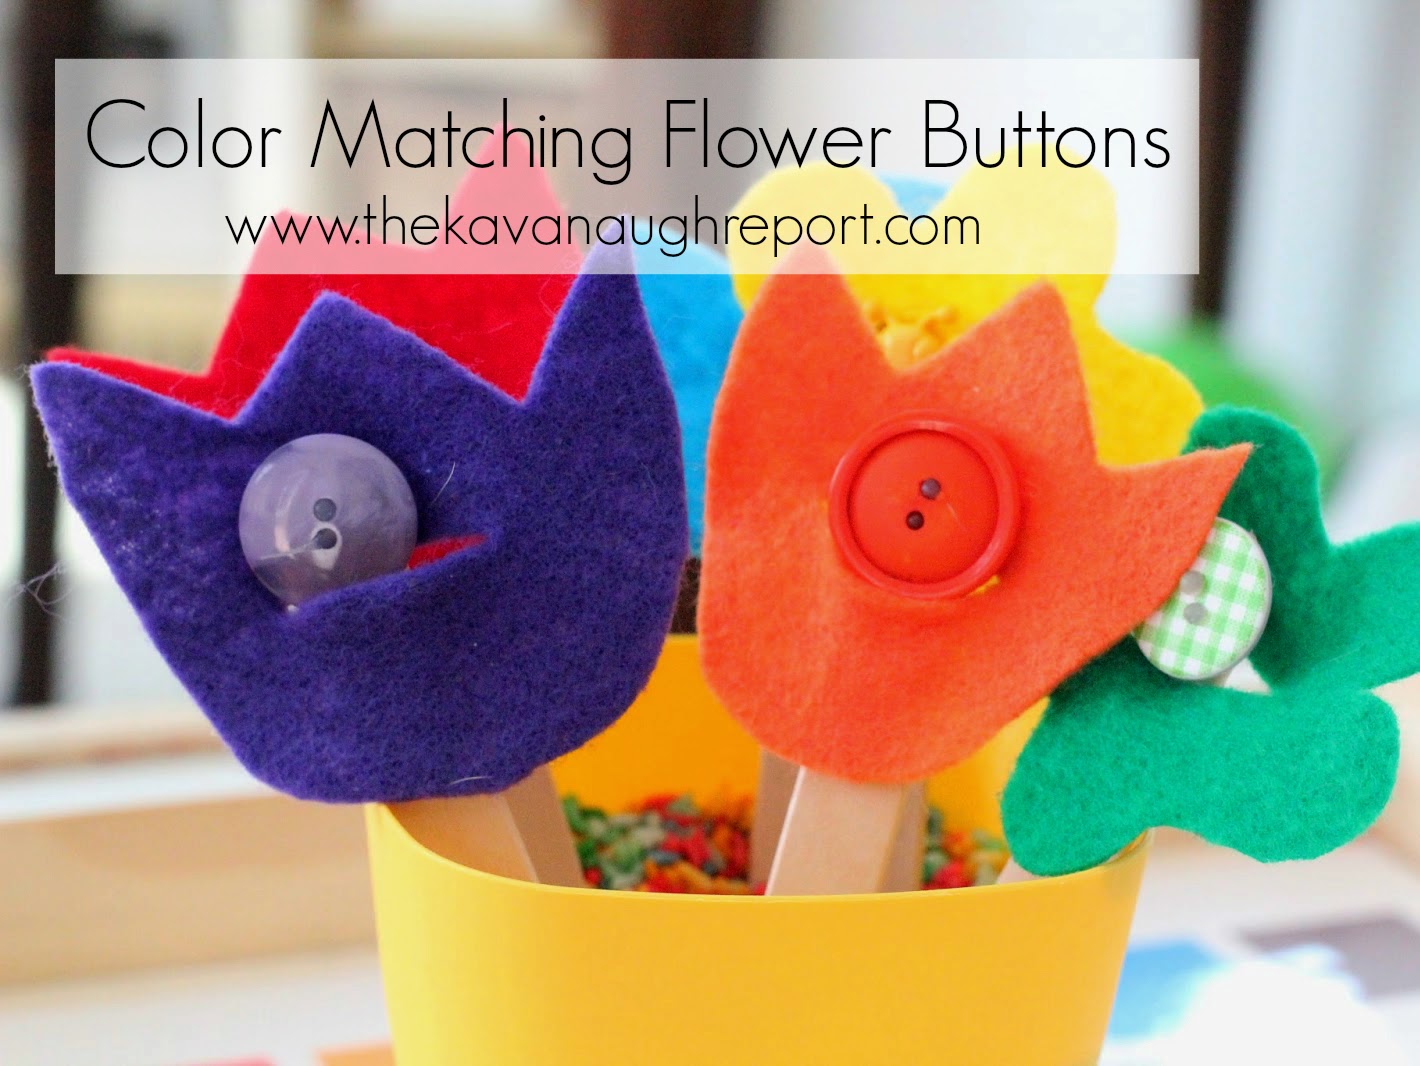 These color matching button flowers are an easy DIY for toddlers. The bright colored flowers are engaging and work on important fine motor skills. 